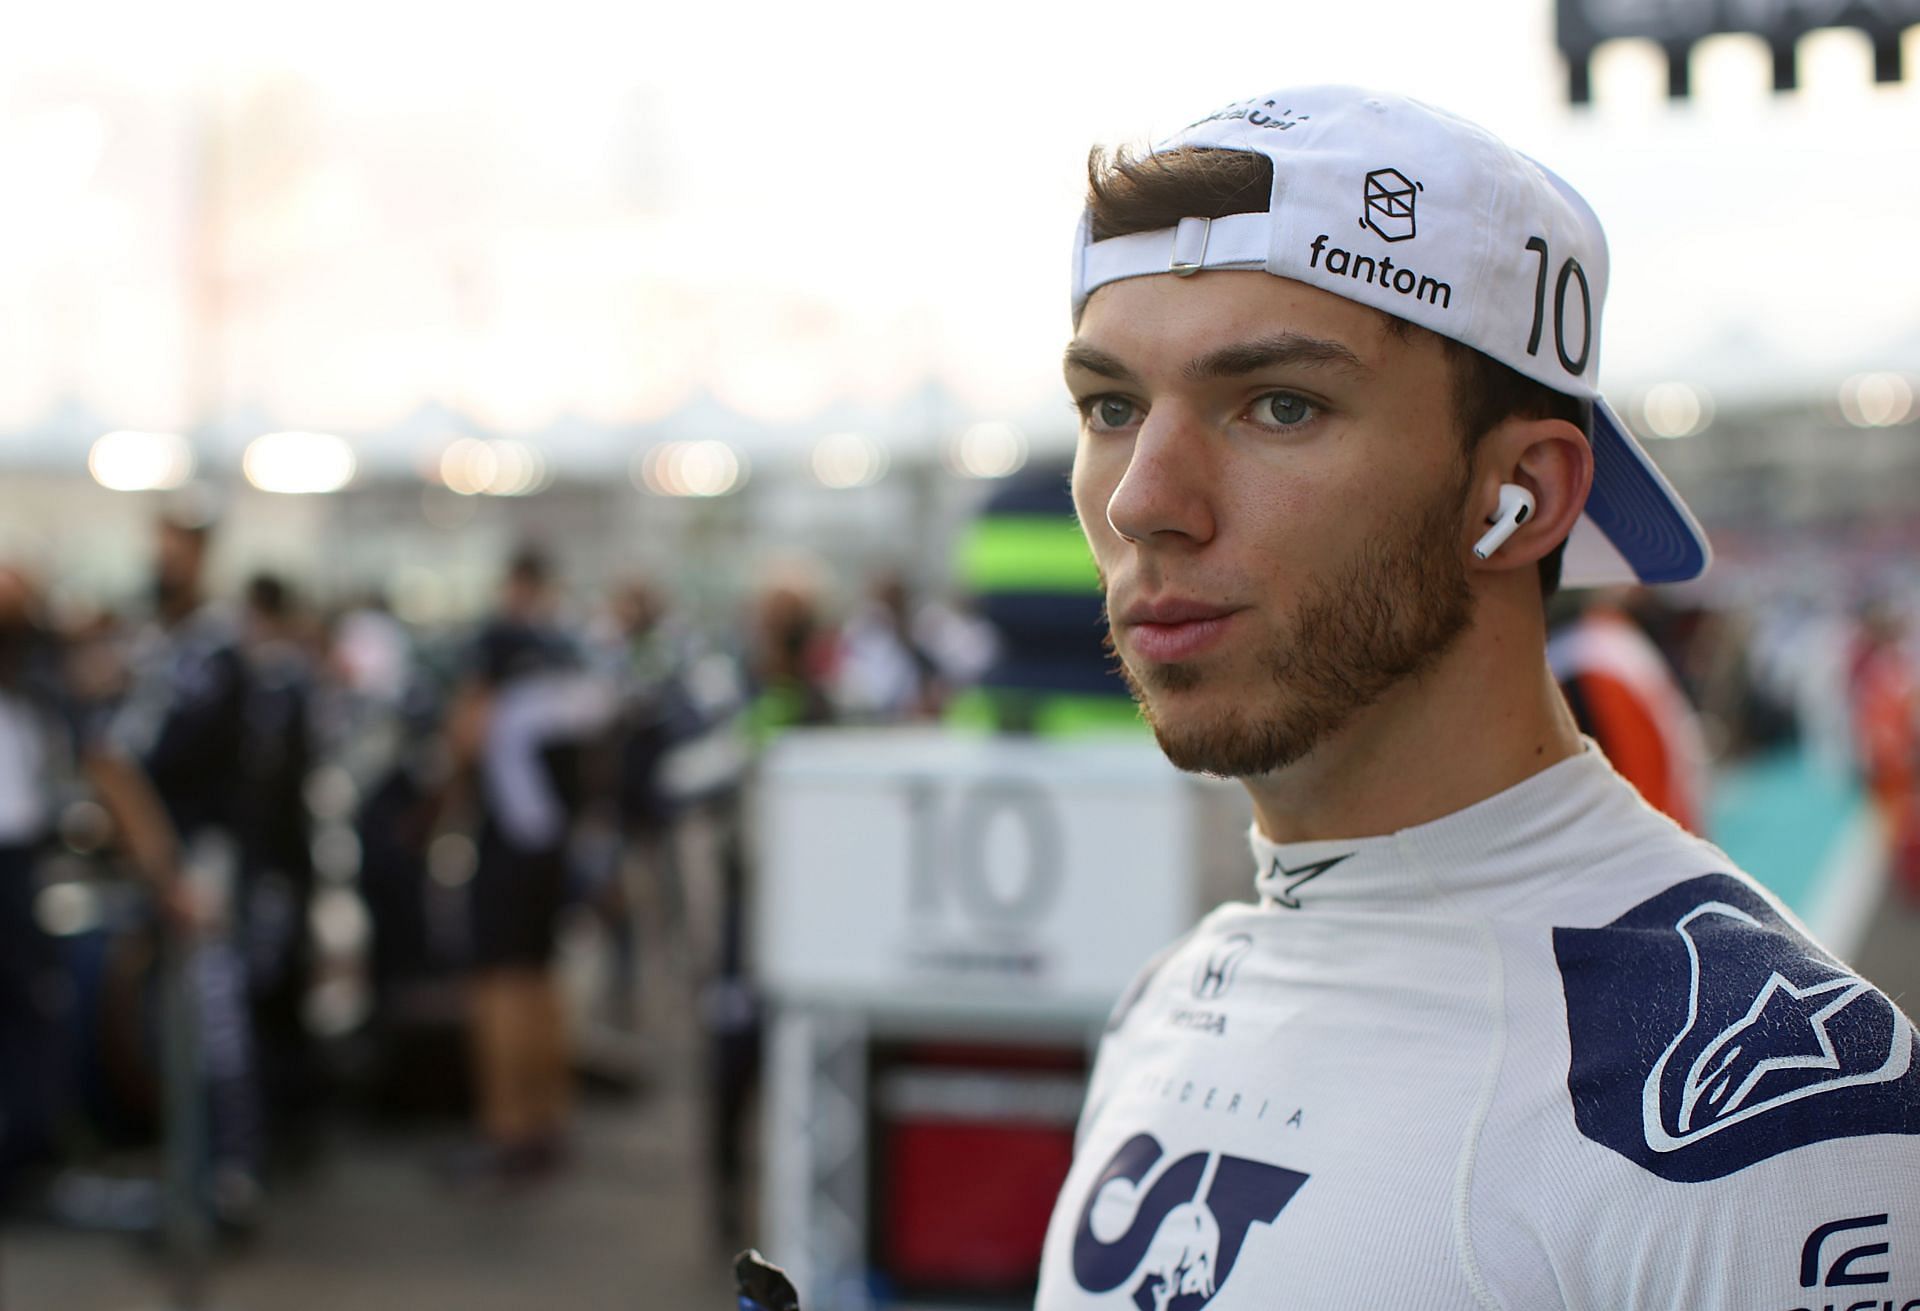 Pierre Gasly on the grid during the F1 Grand Prix of Abu Dhabi (Photo by Peter Fox/Getty Images